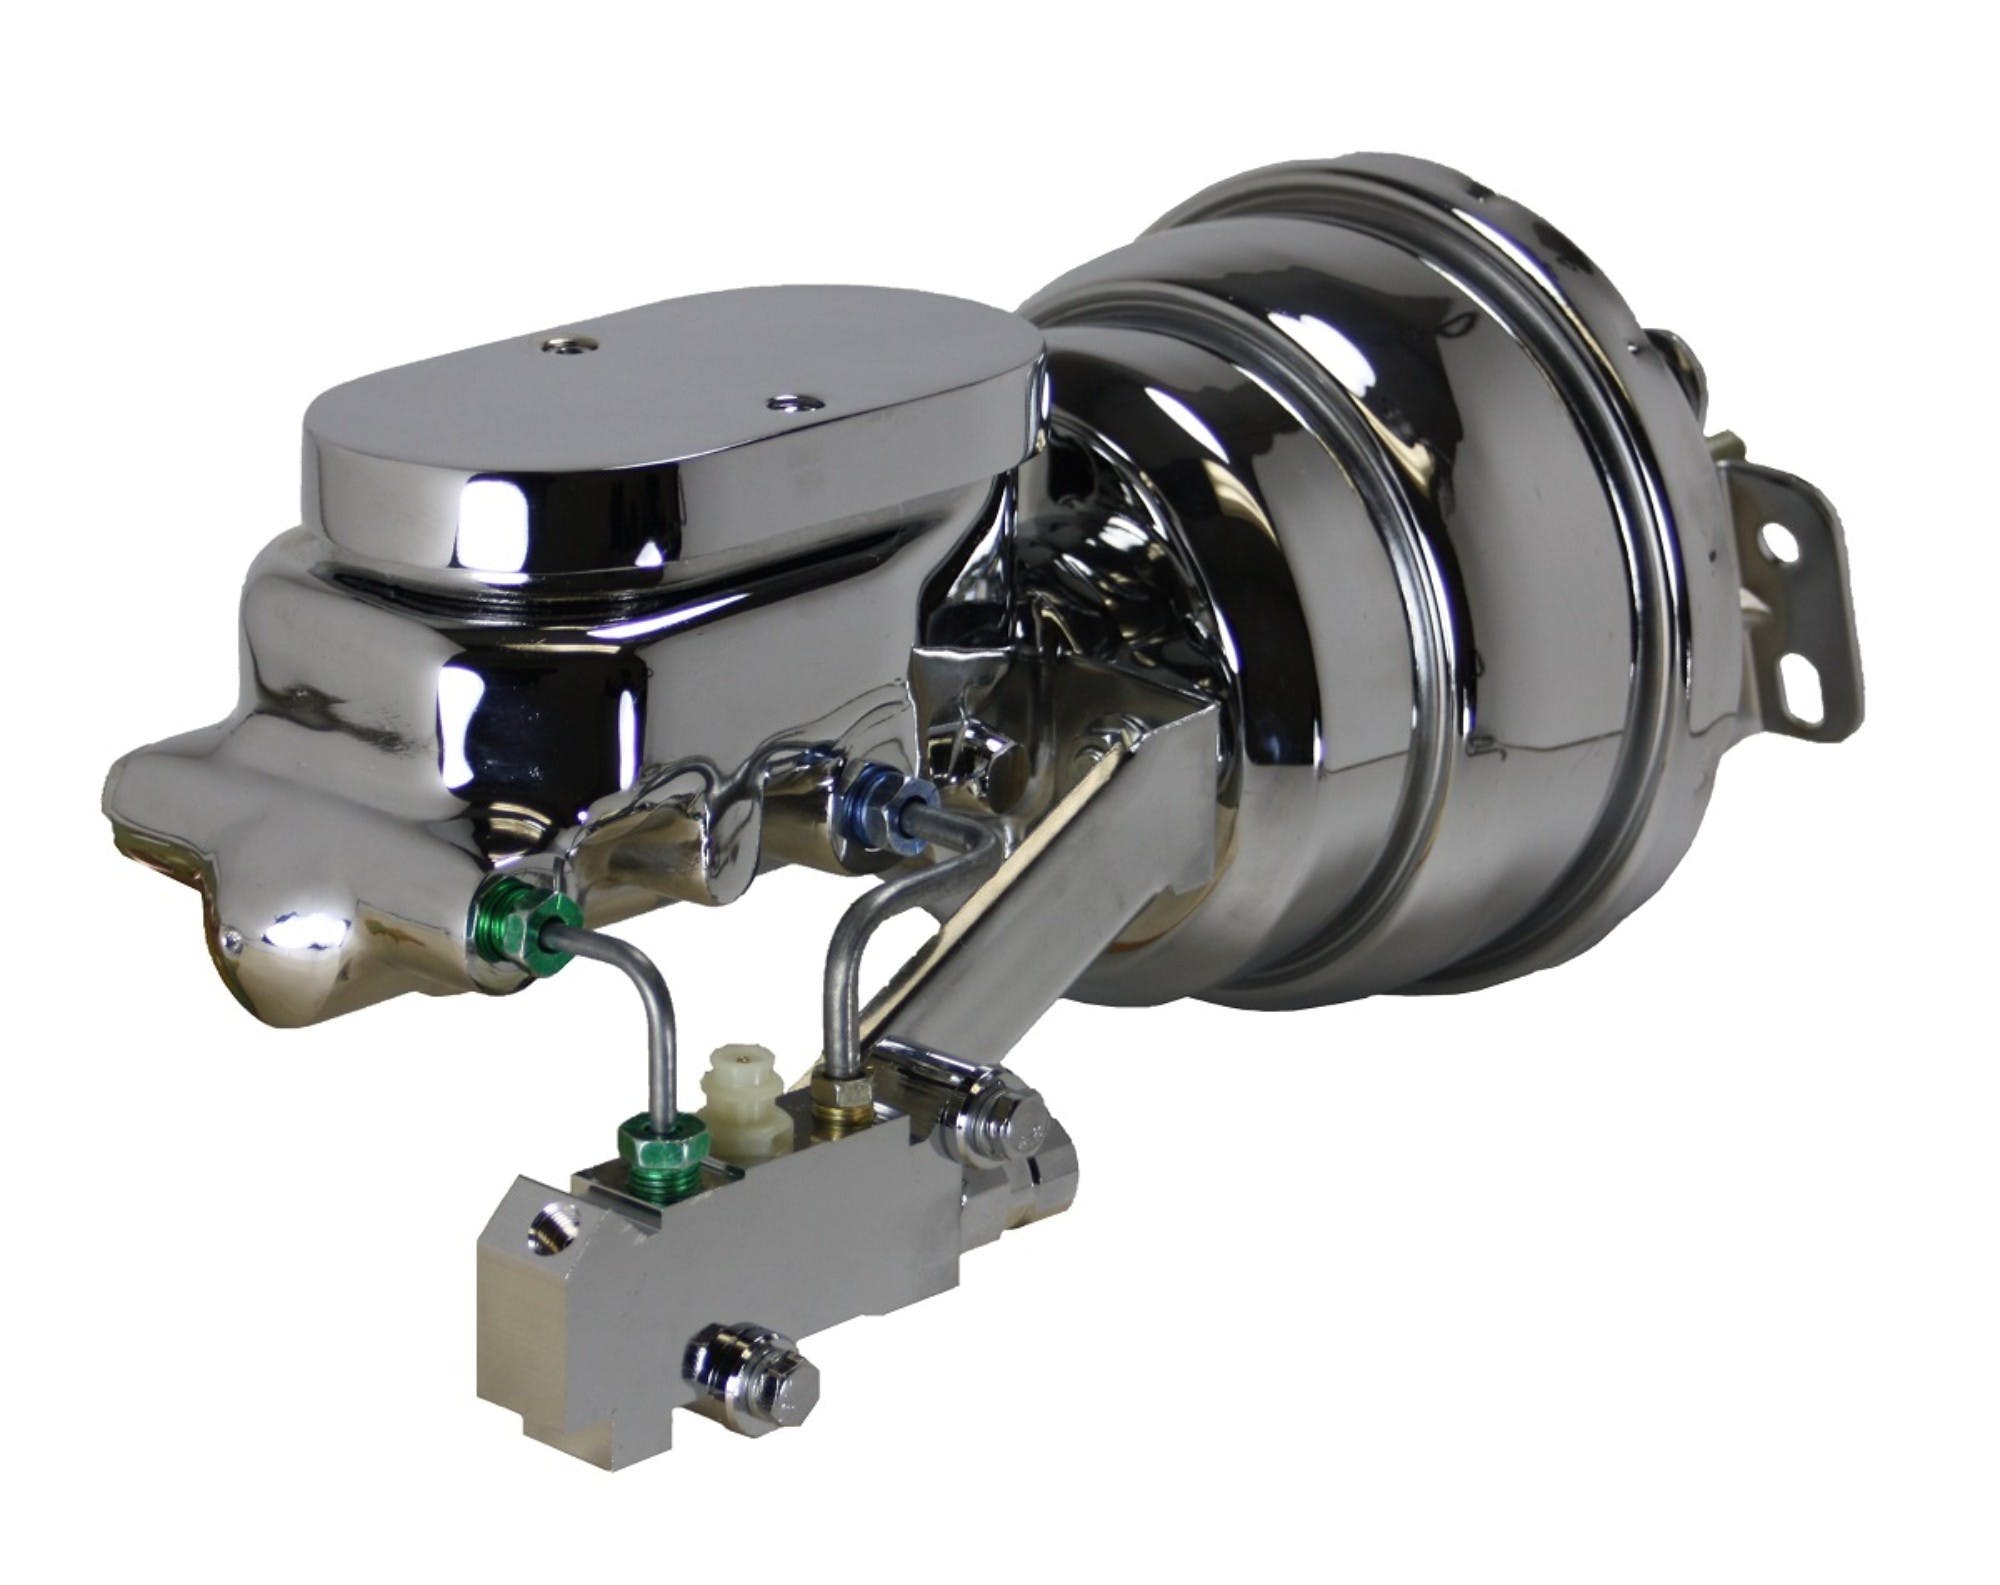 LEED Brakes 2L6B2 7 in Dual Power Booster ,1-1/8in Bore, side valve disc/drum (Chrome)